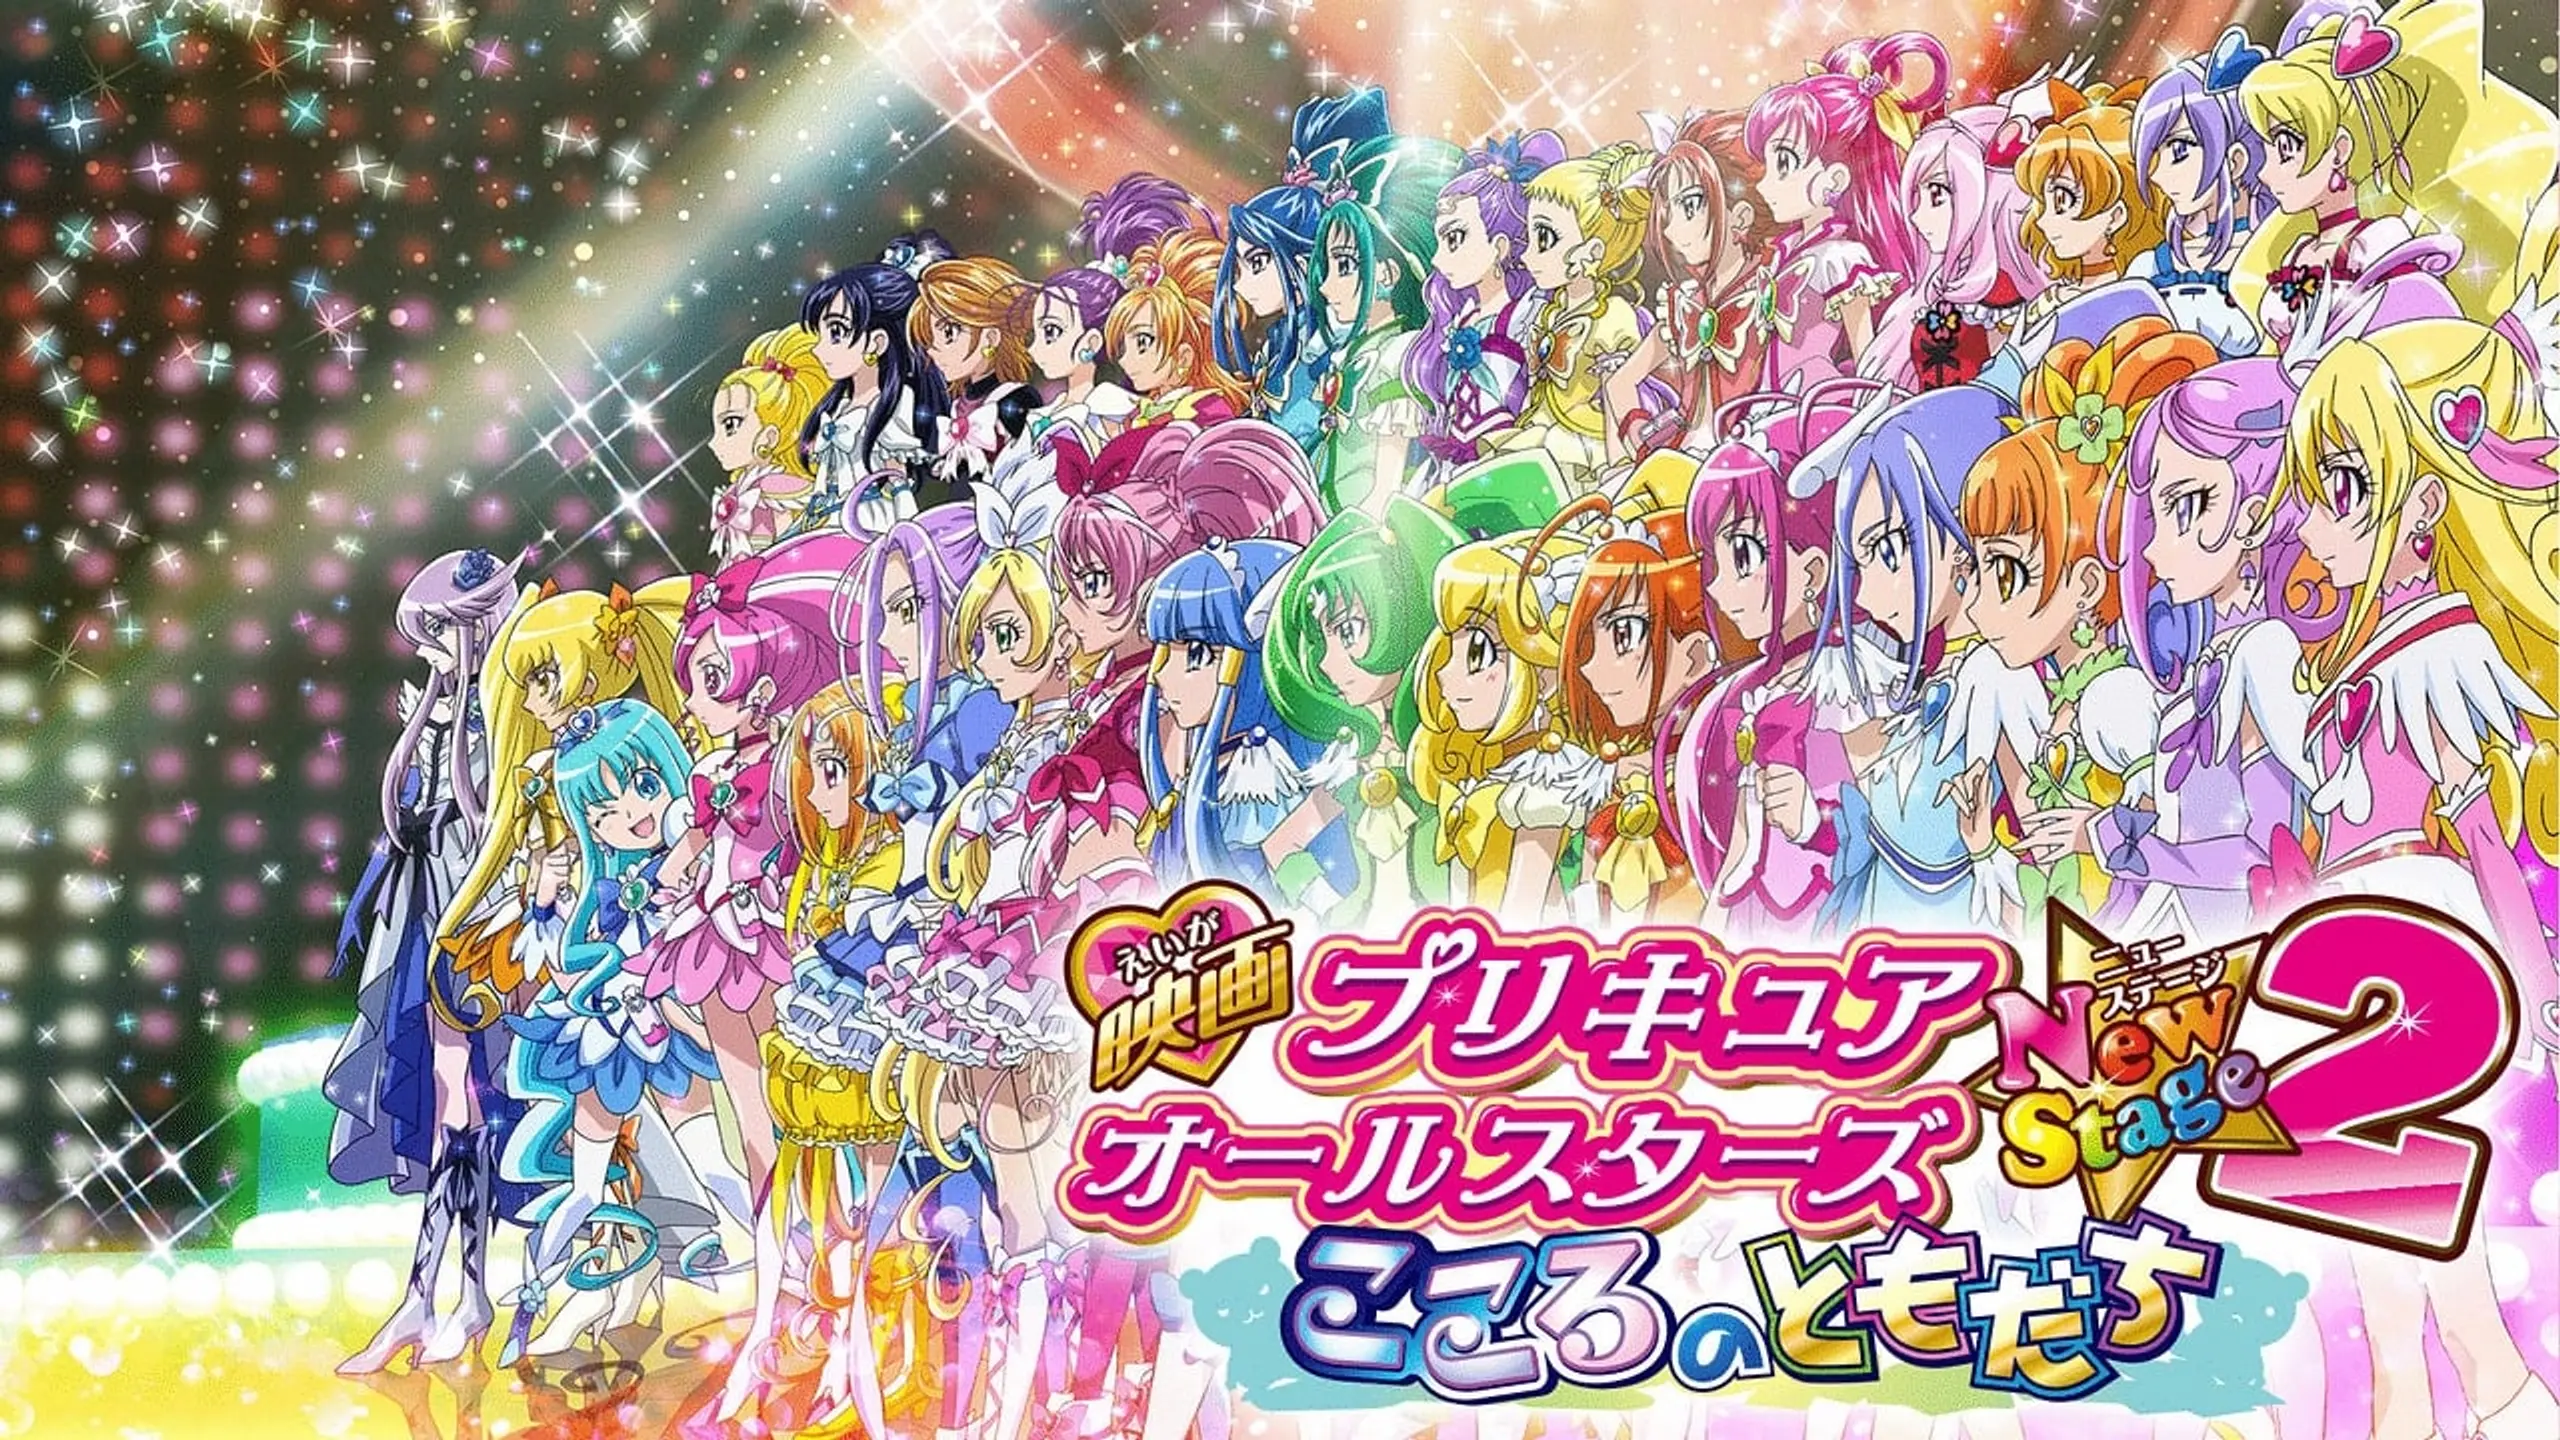 Pretty Cure All Stars Movie 5 Friends of the Heart